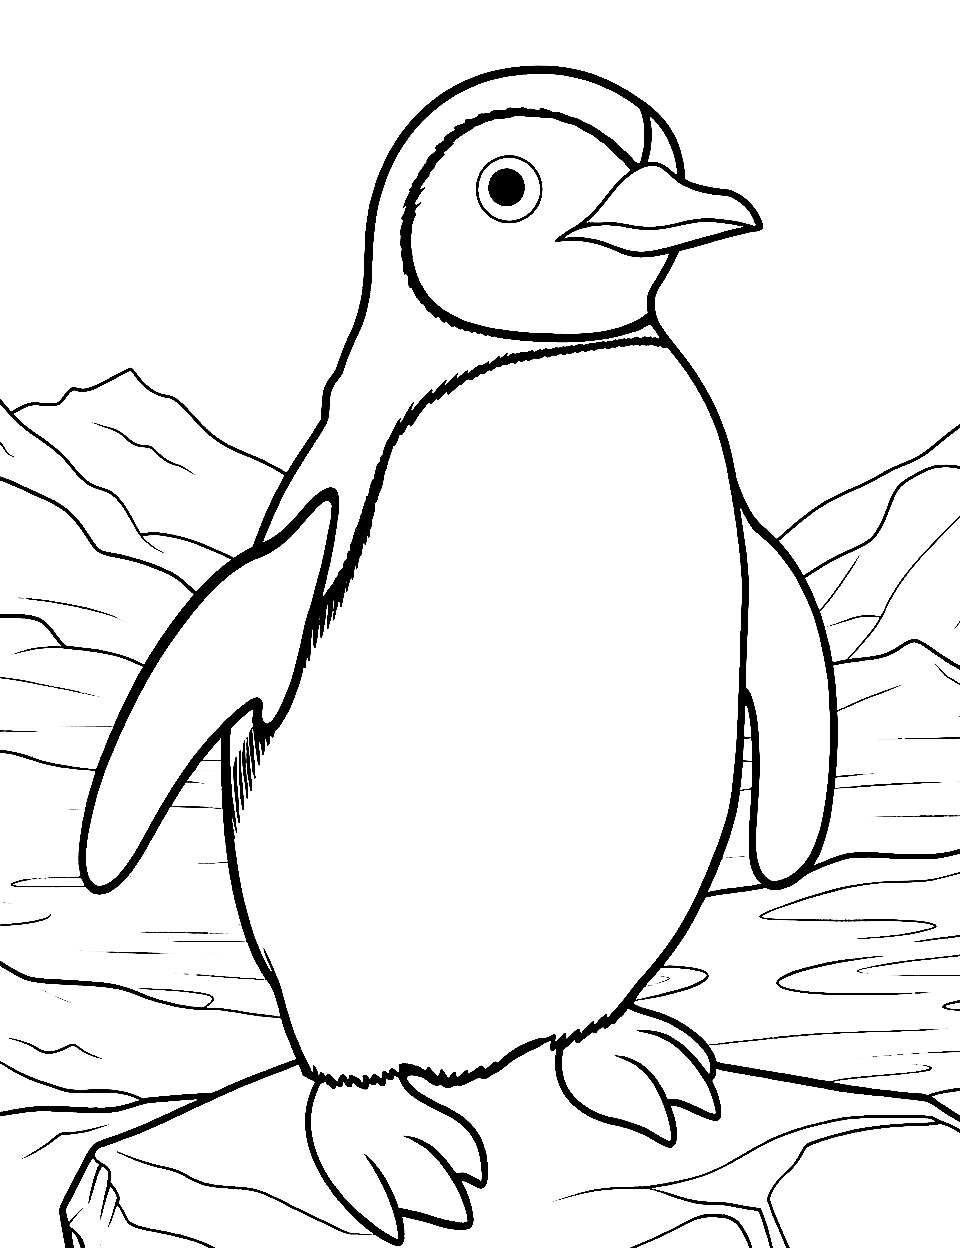 Unique Yellow-Eyed Penguin Coloring Page - A penguin with striking yellow eyes standing alert.